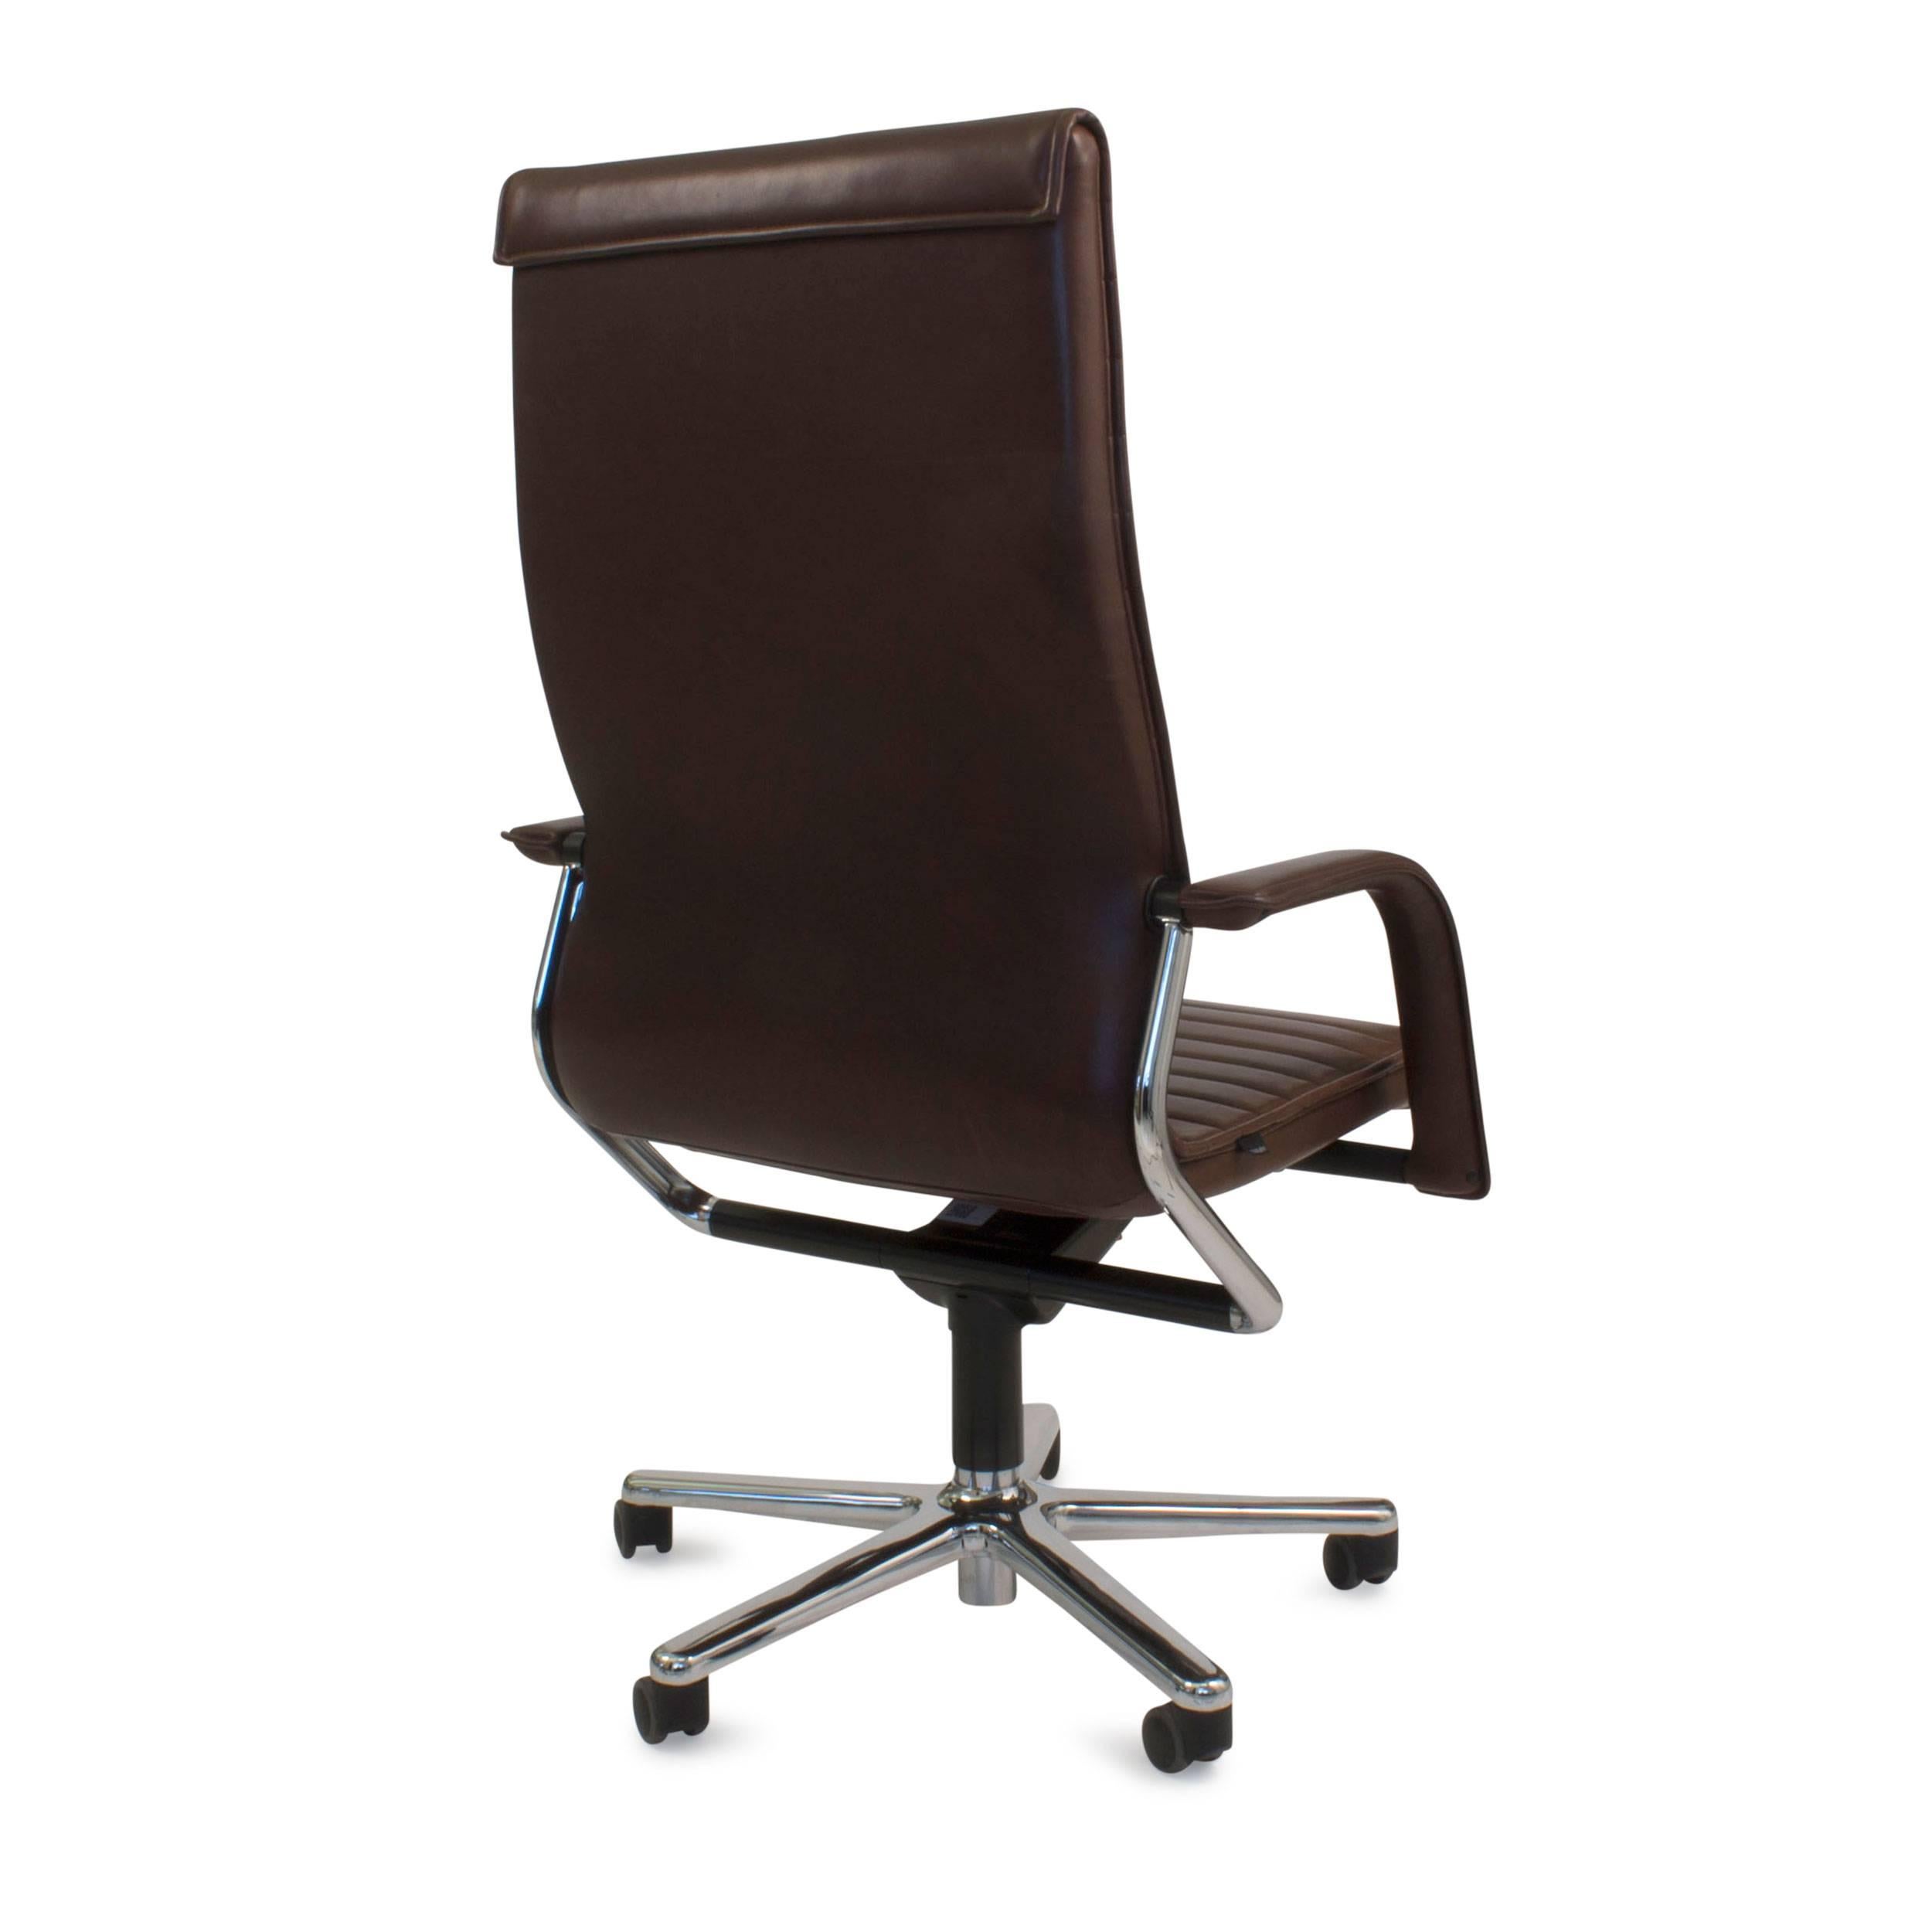 German Brown Leather FS 220/92 Executive Office Swivel Task Chair by Wilkhahn